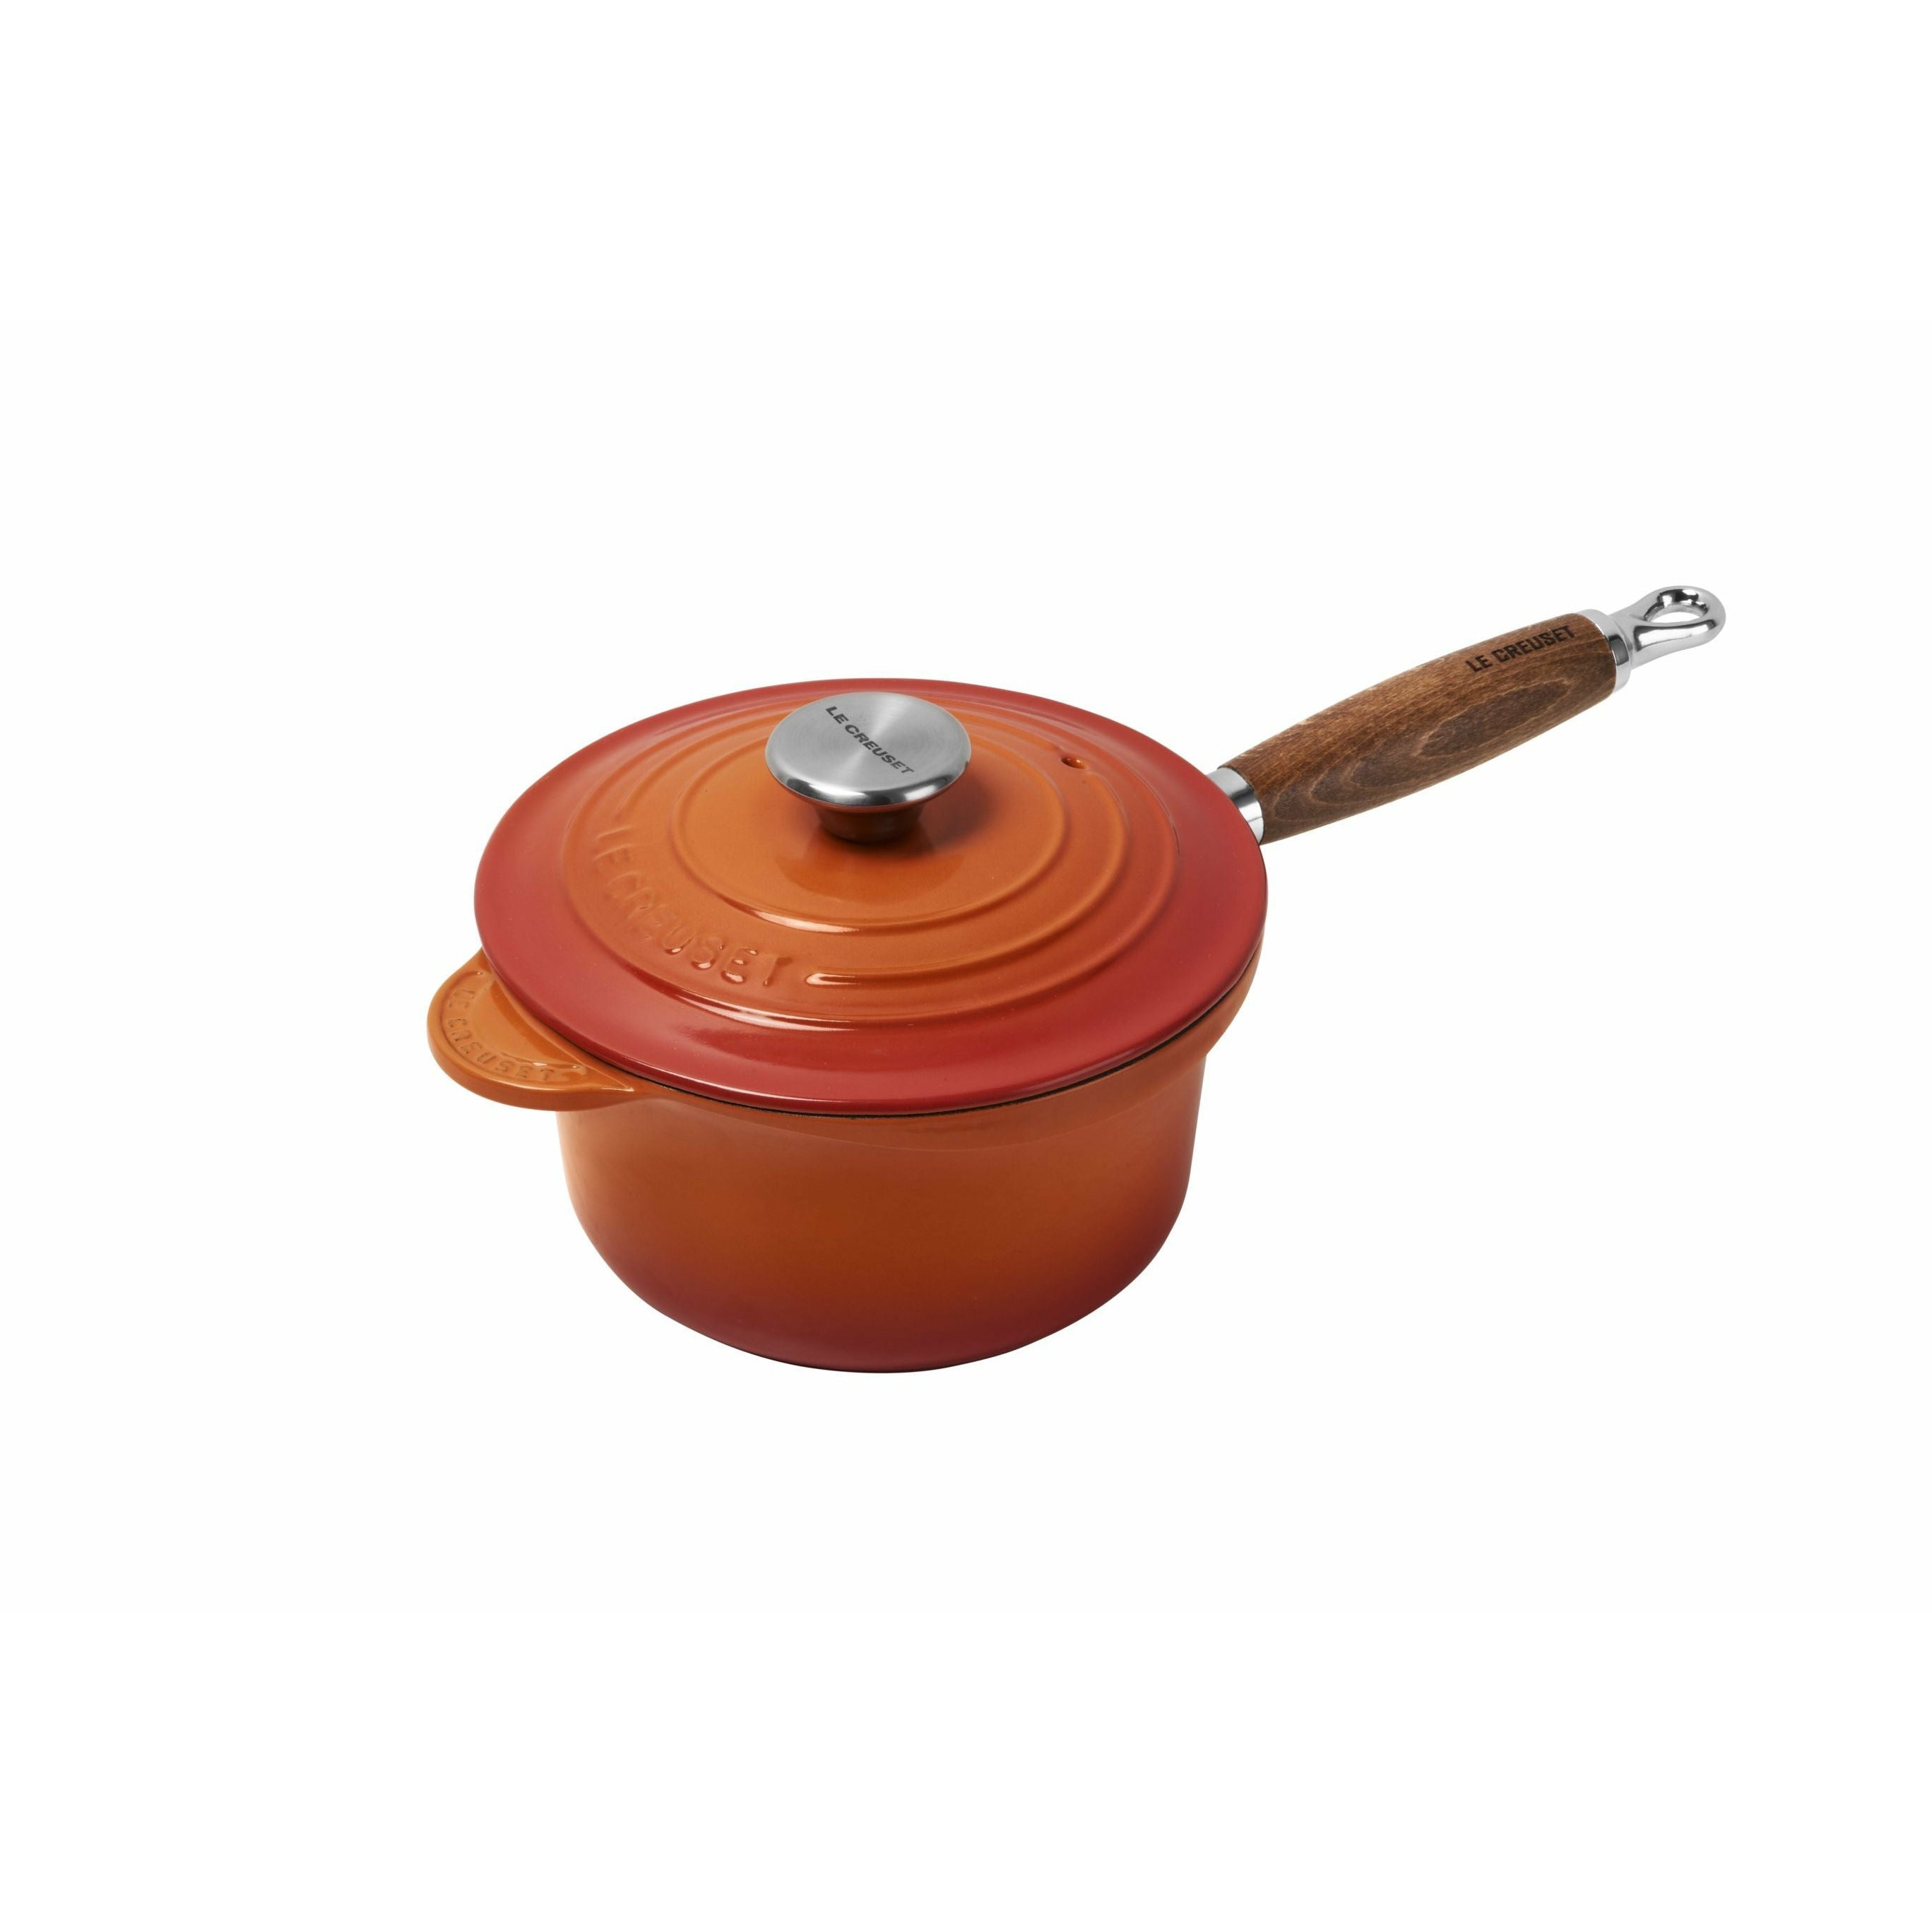 Le Creuset Tradition Professional Pot With Wooden Handle 18 Cm, Oven Red